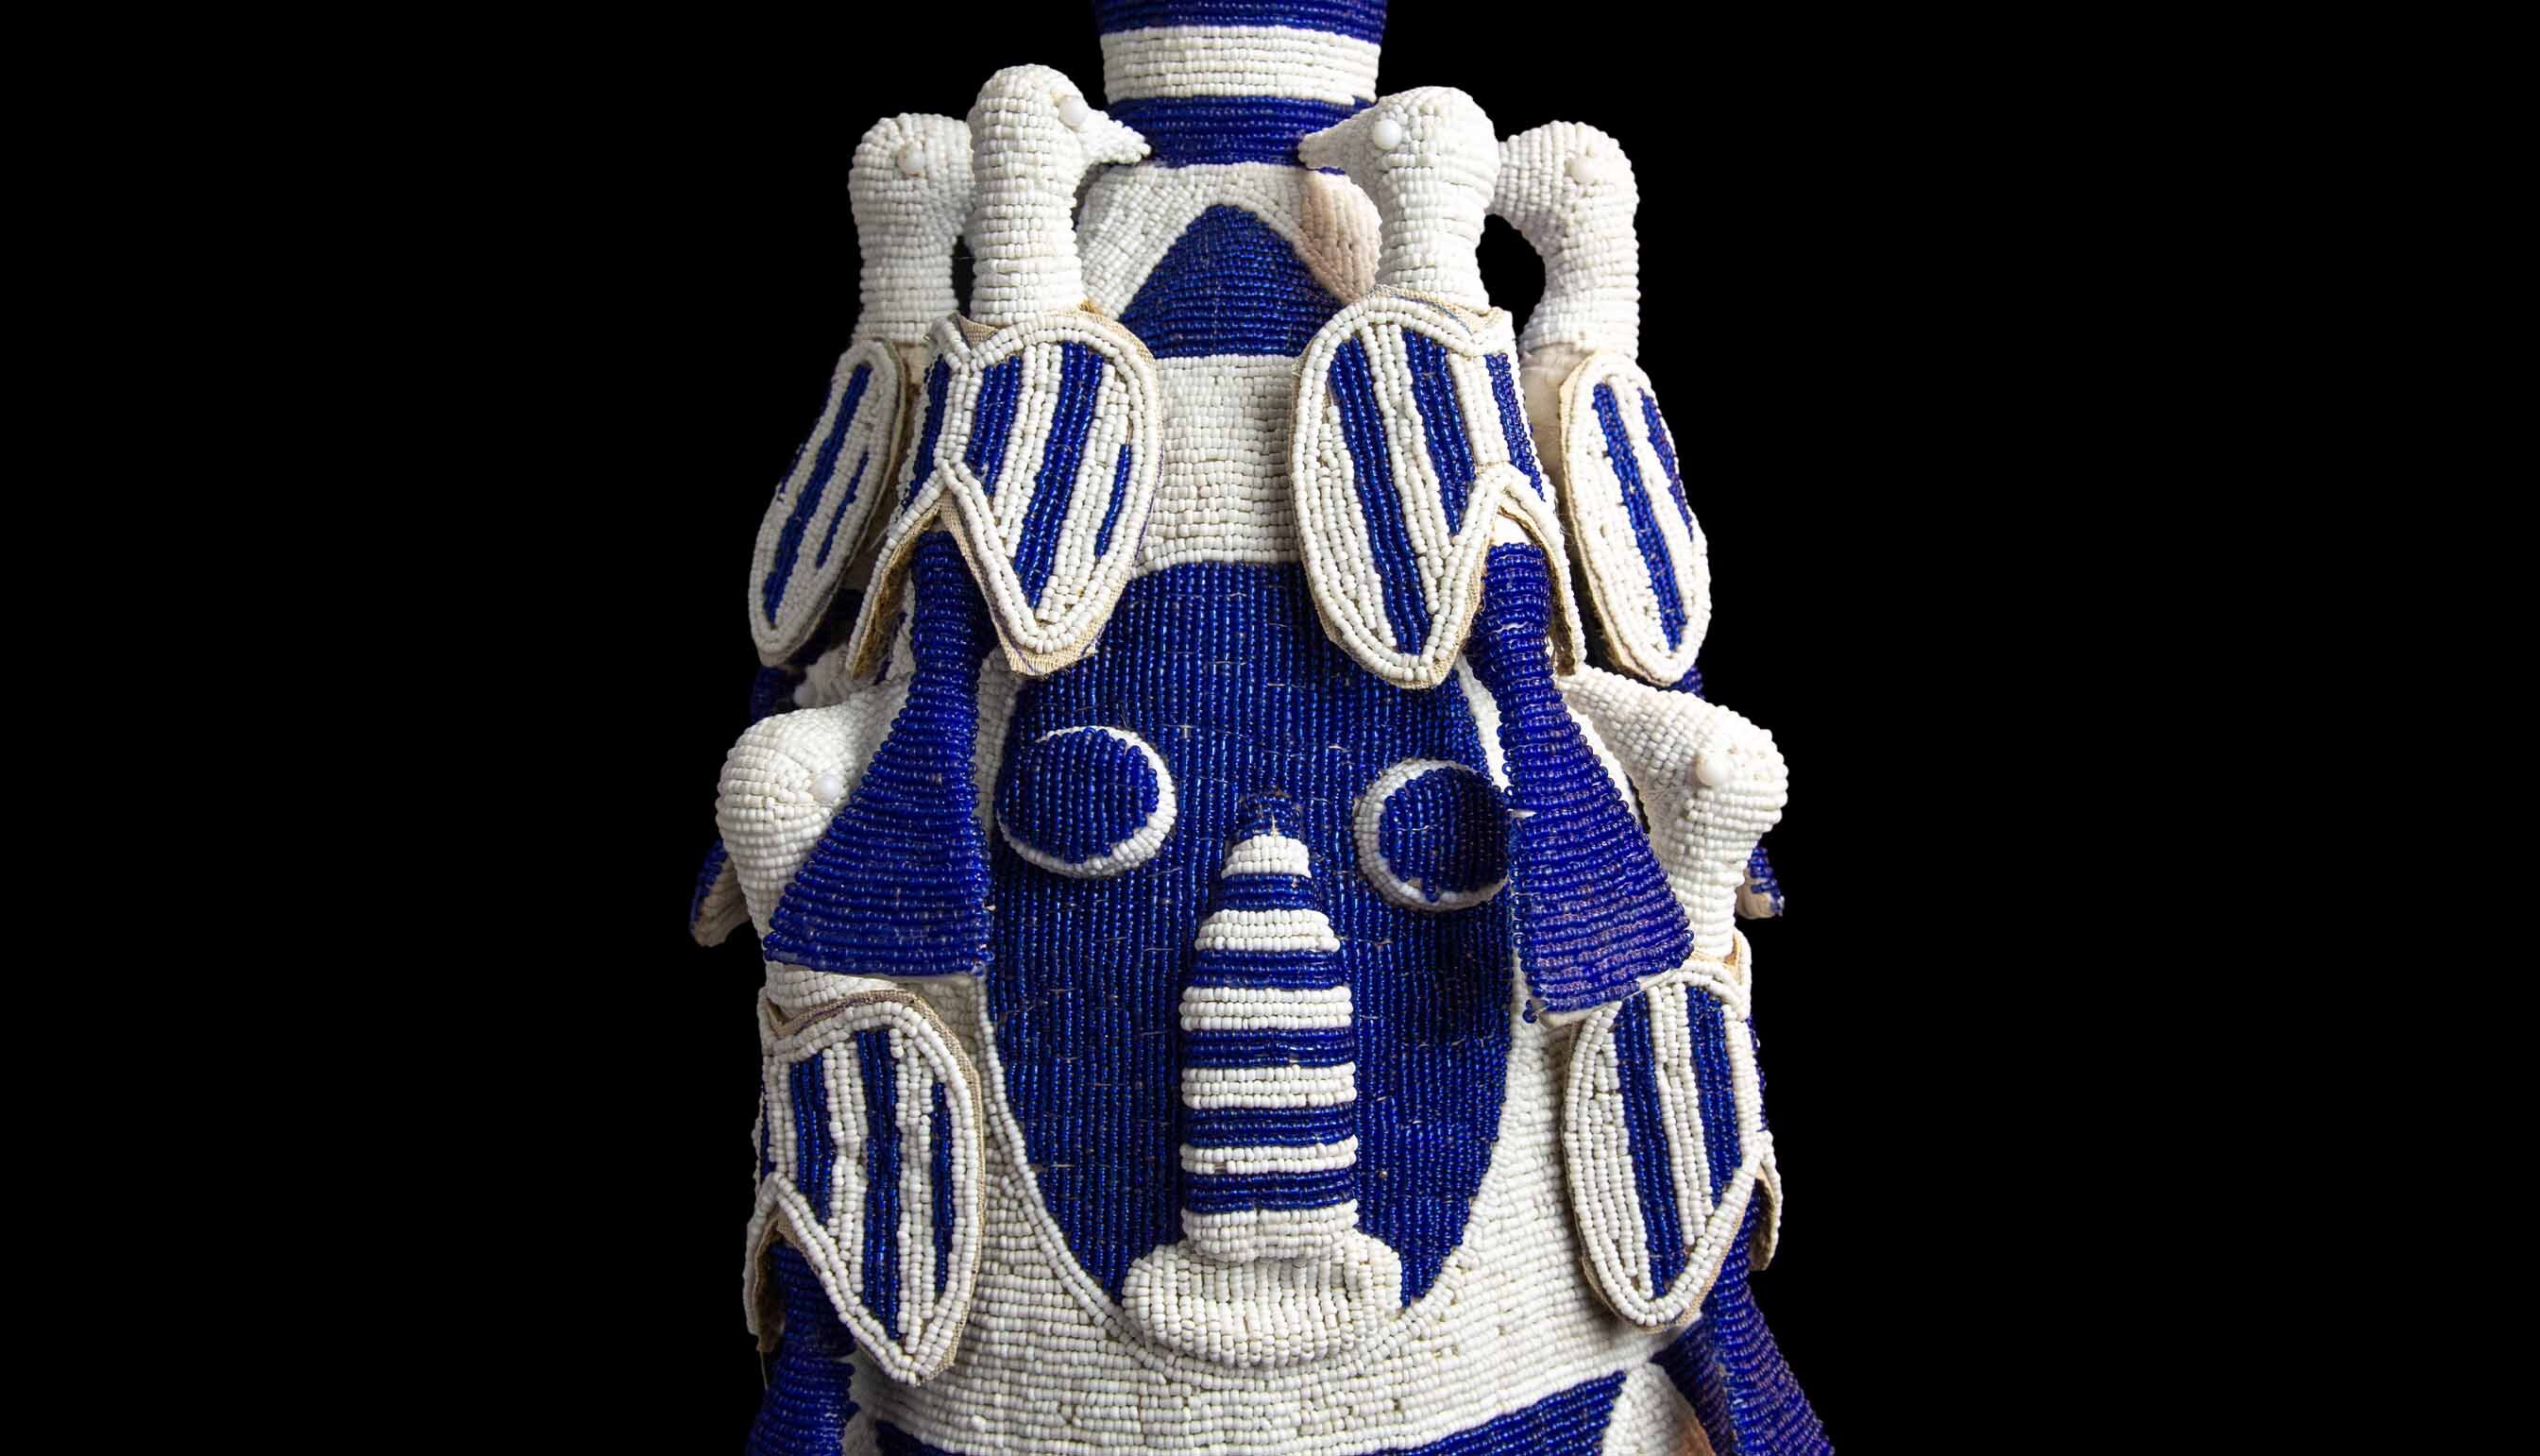 Beaded Ceremonial Headdress From Nigeria, Blue and White